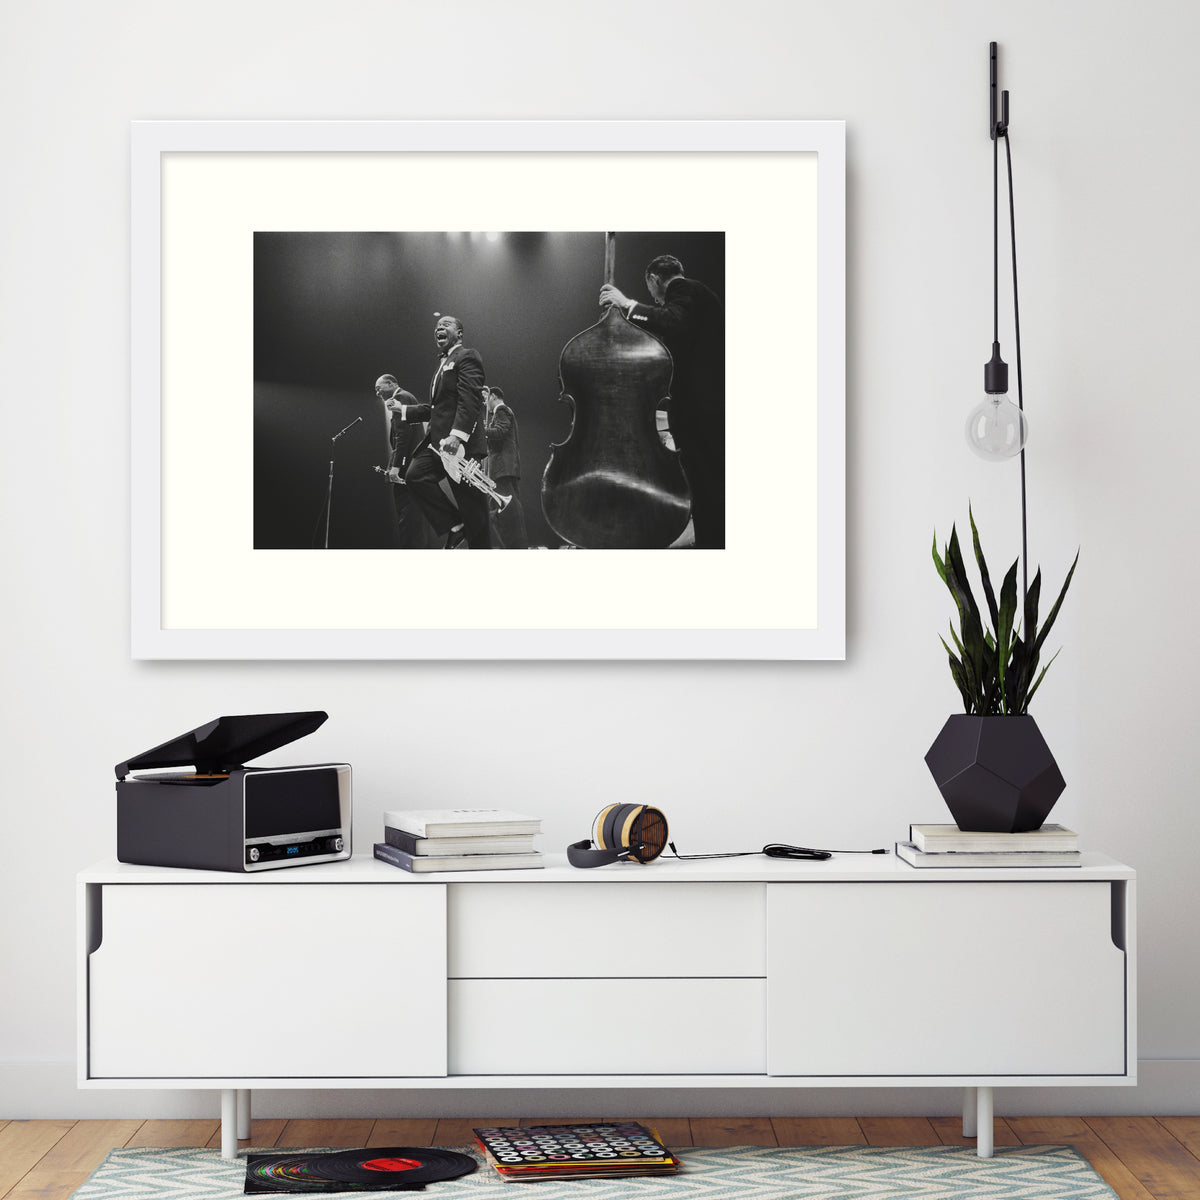 Framed: Louis Armstrong on Stage by Haywood Magee photo for sale Getty Images Gallery